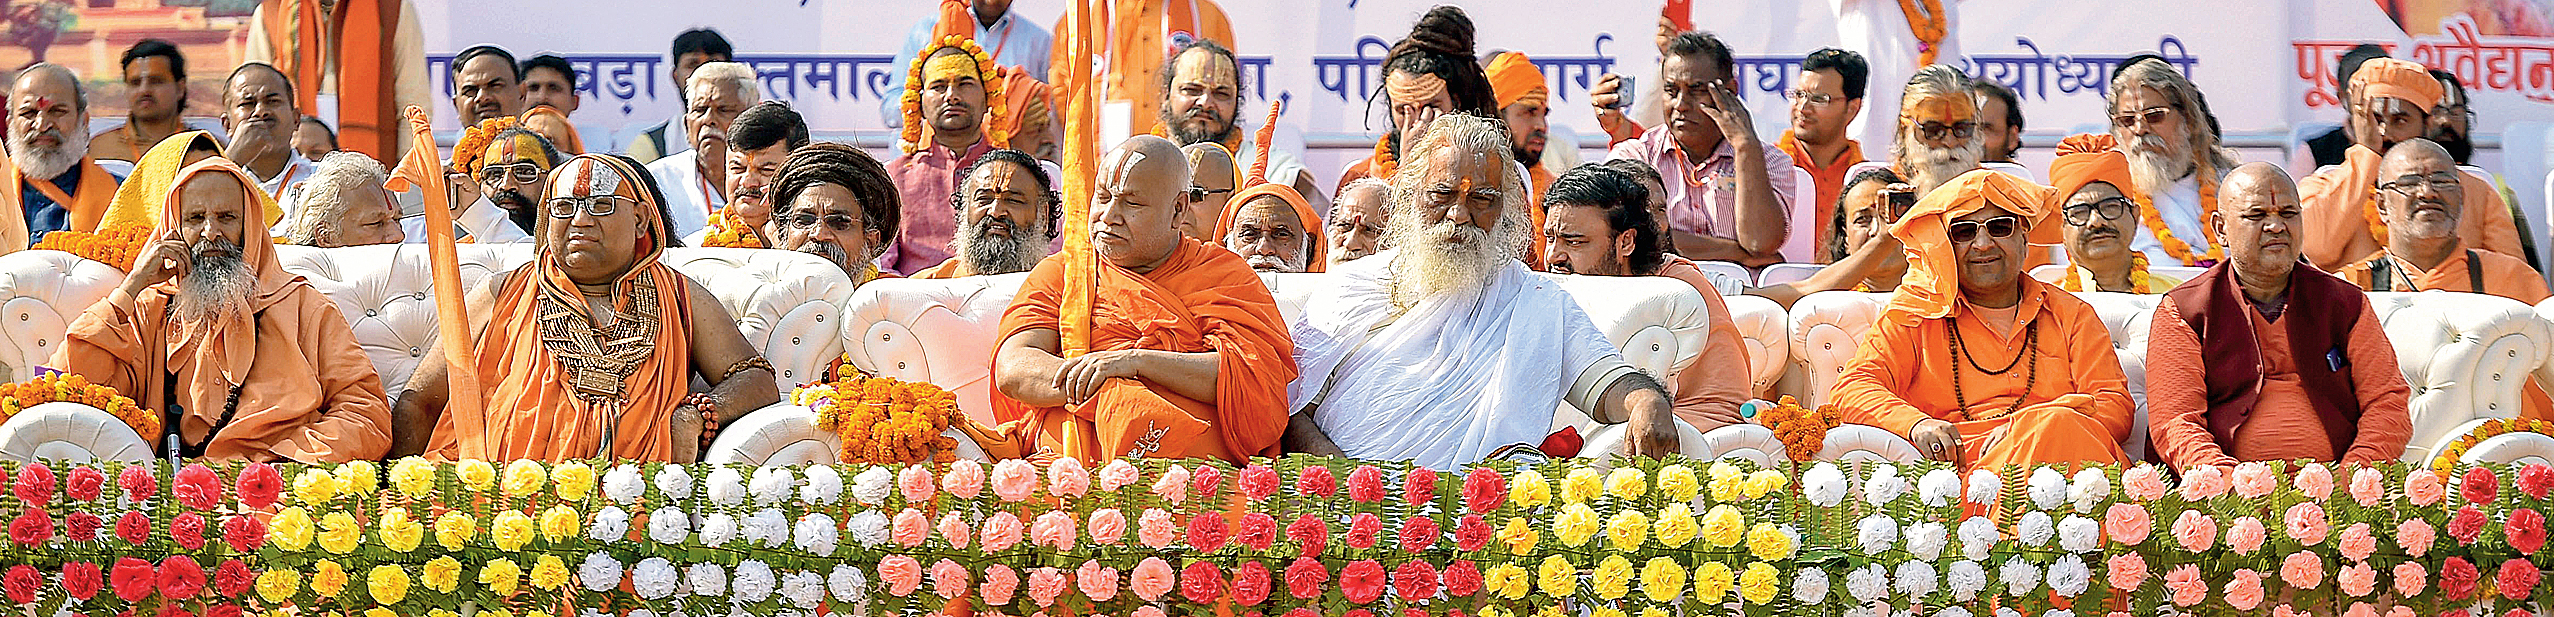 Seers at the Dharma Sabha organised by the Vishwa Hindu Parishad in Ayodhya on Sunday to push for the construction of the Ram temple. 